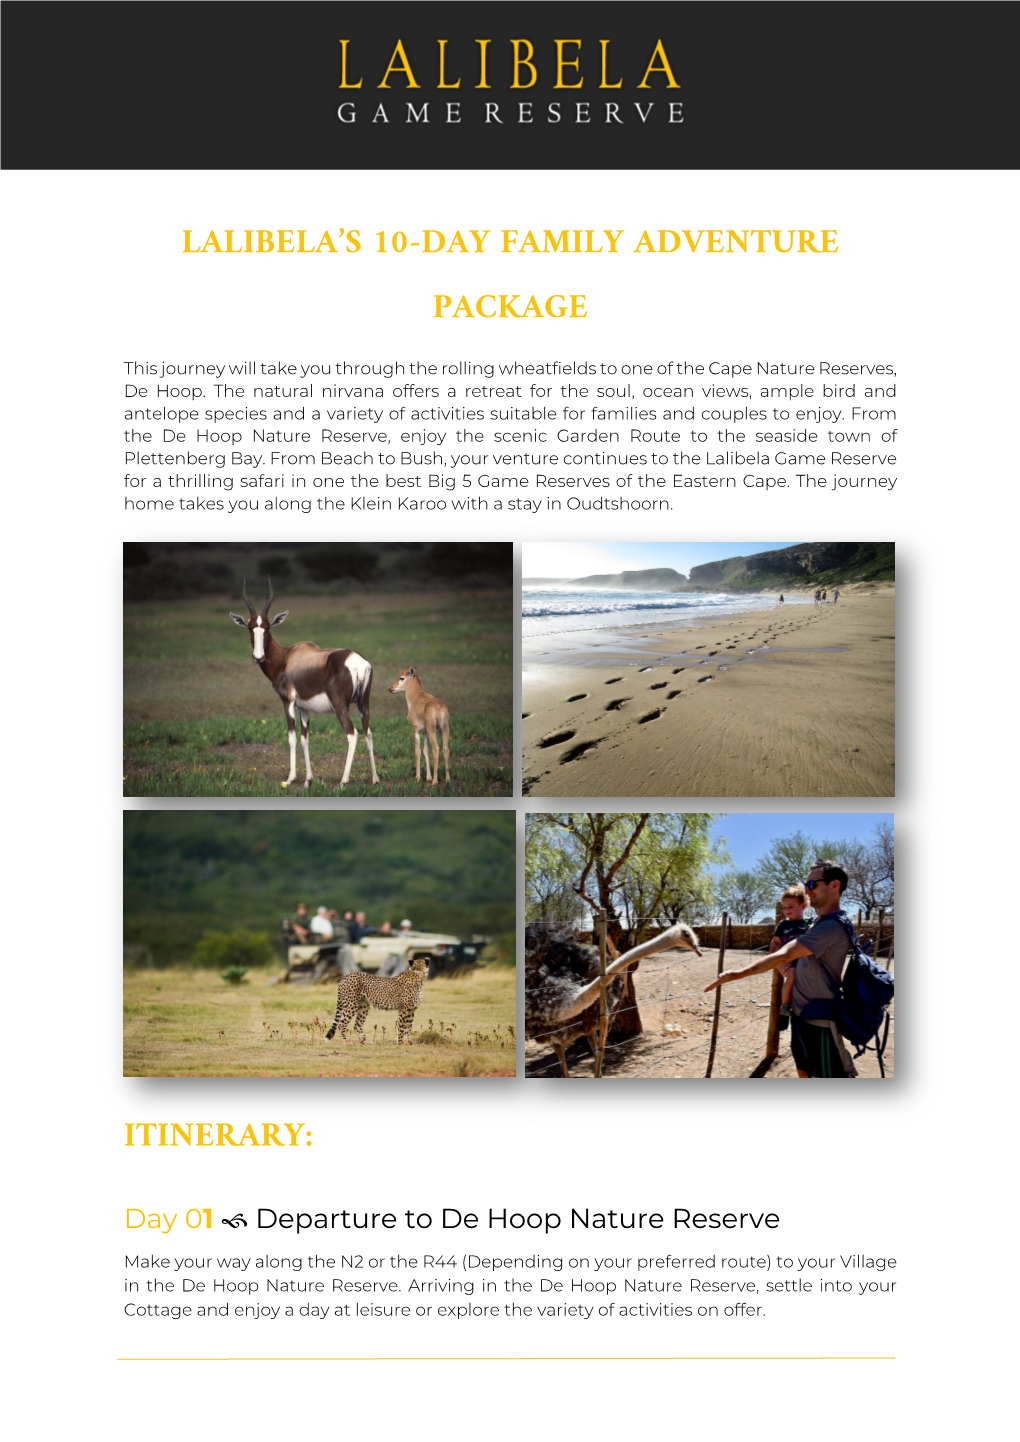 Lalibela's 10-Day Family Adventure Package Itinerary